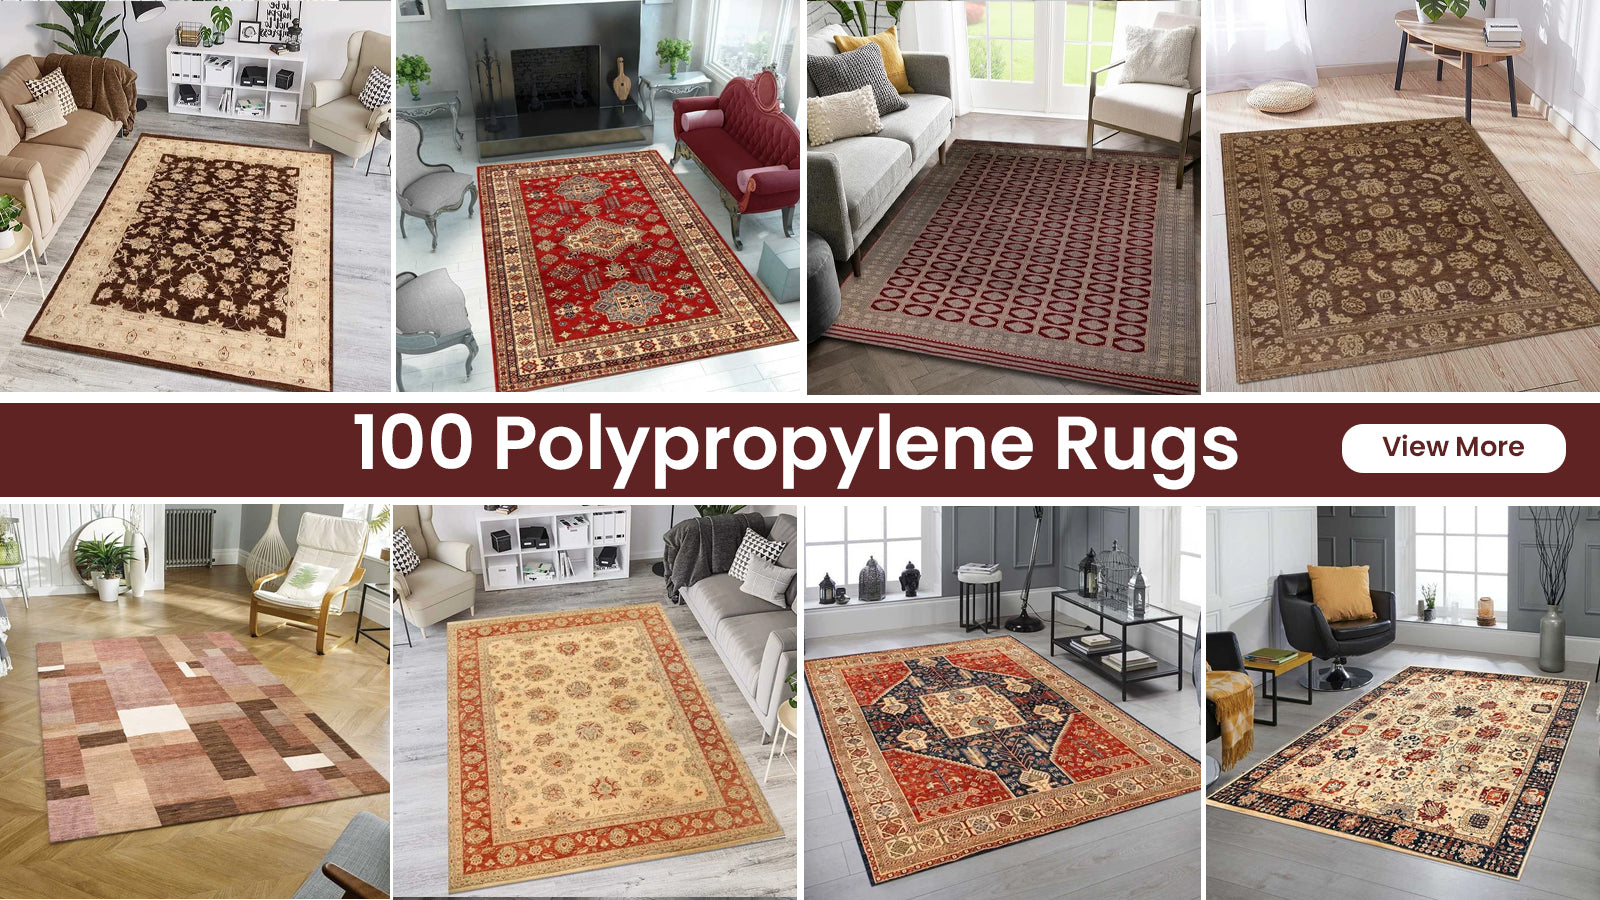 Bungalow Rose Rugs For Living Room Premium Moroccan Geometric Modern Rugs  For Bedroom,Ultra-Luxurious Soft Rugs For Bedrooms , Thick Entryway Rug